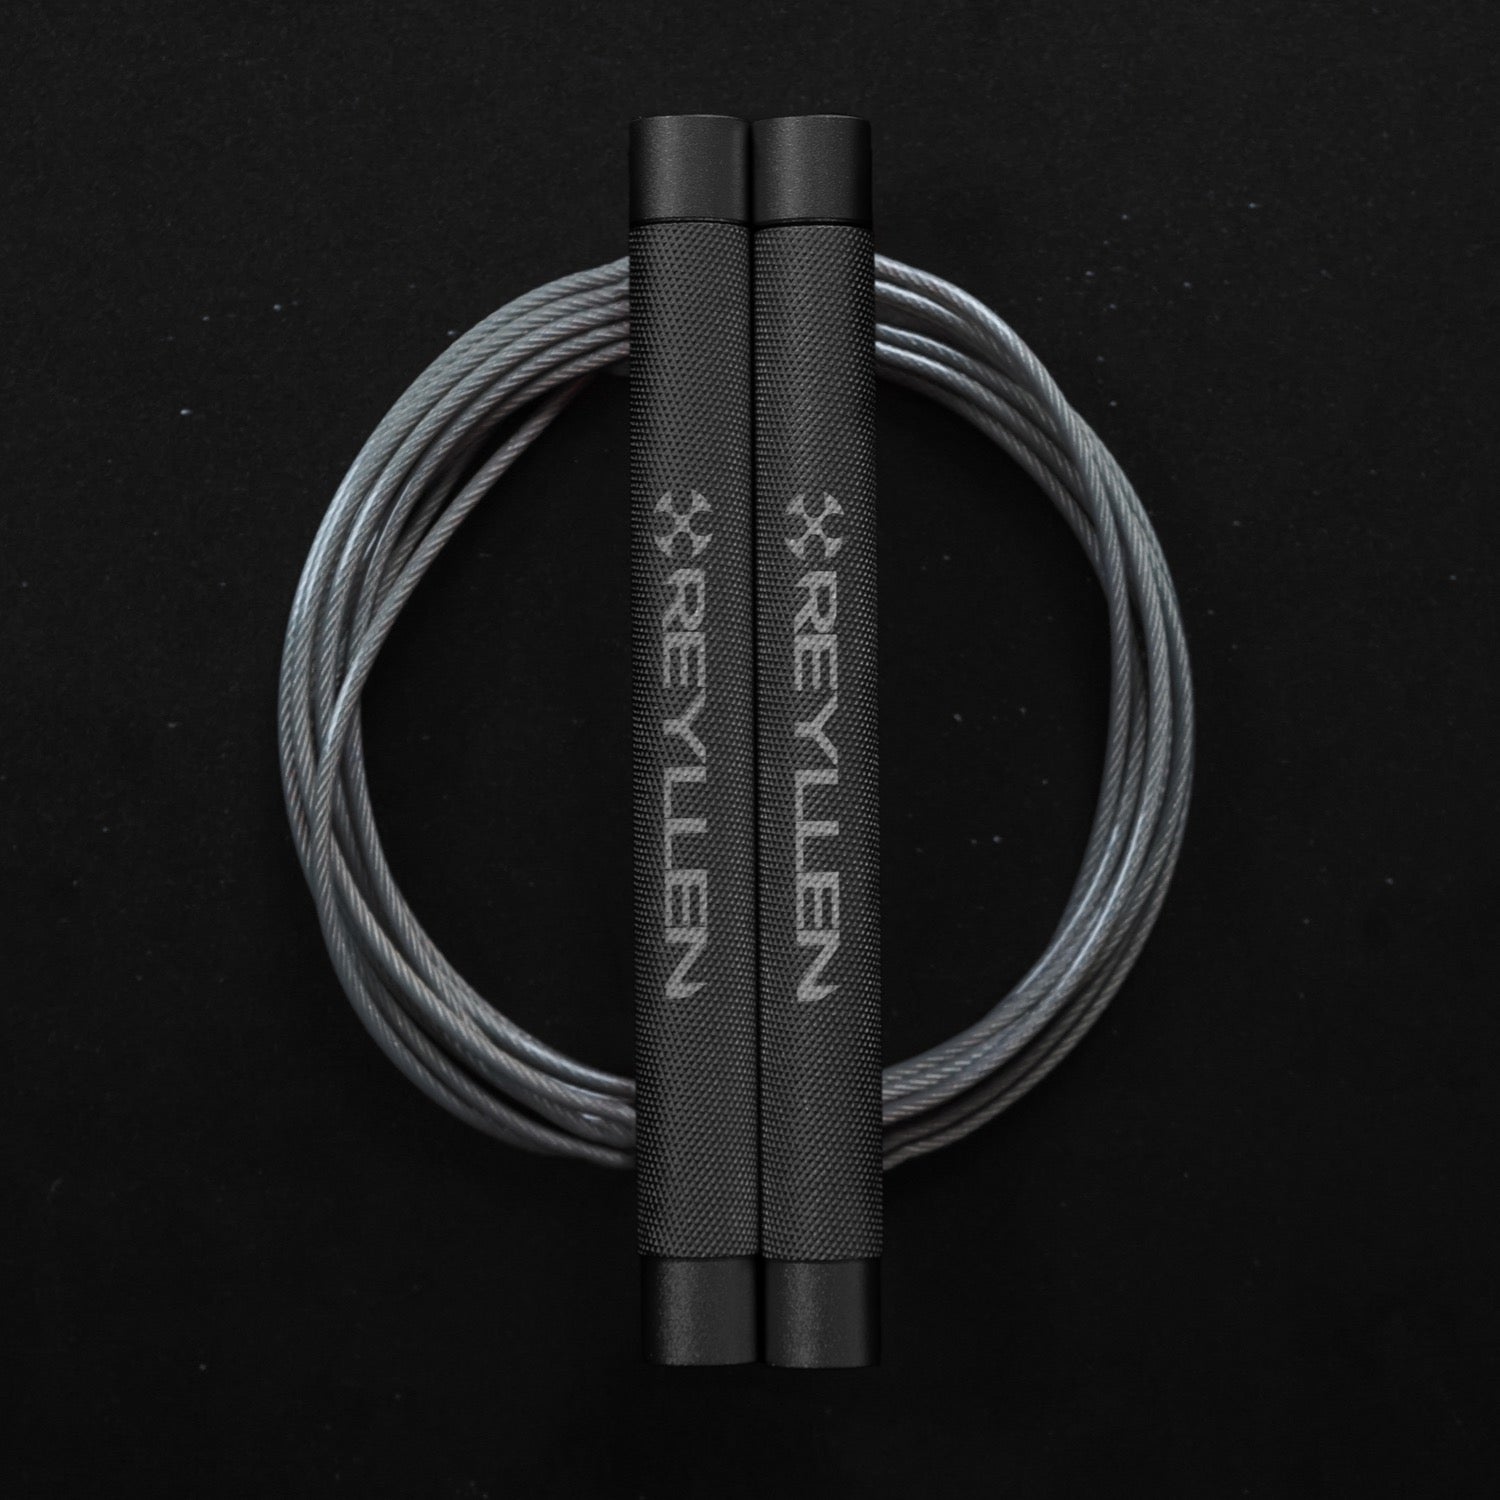 Reyllen Flare Mx Speed Skipping Jump Rope - Aluminium Handles - grey with grey pvc cable